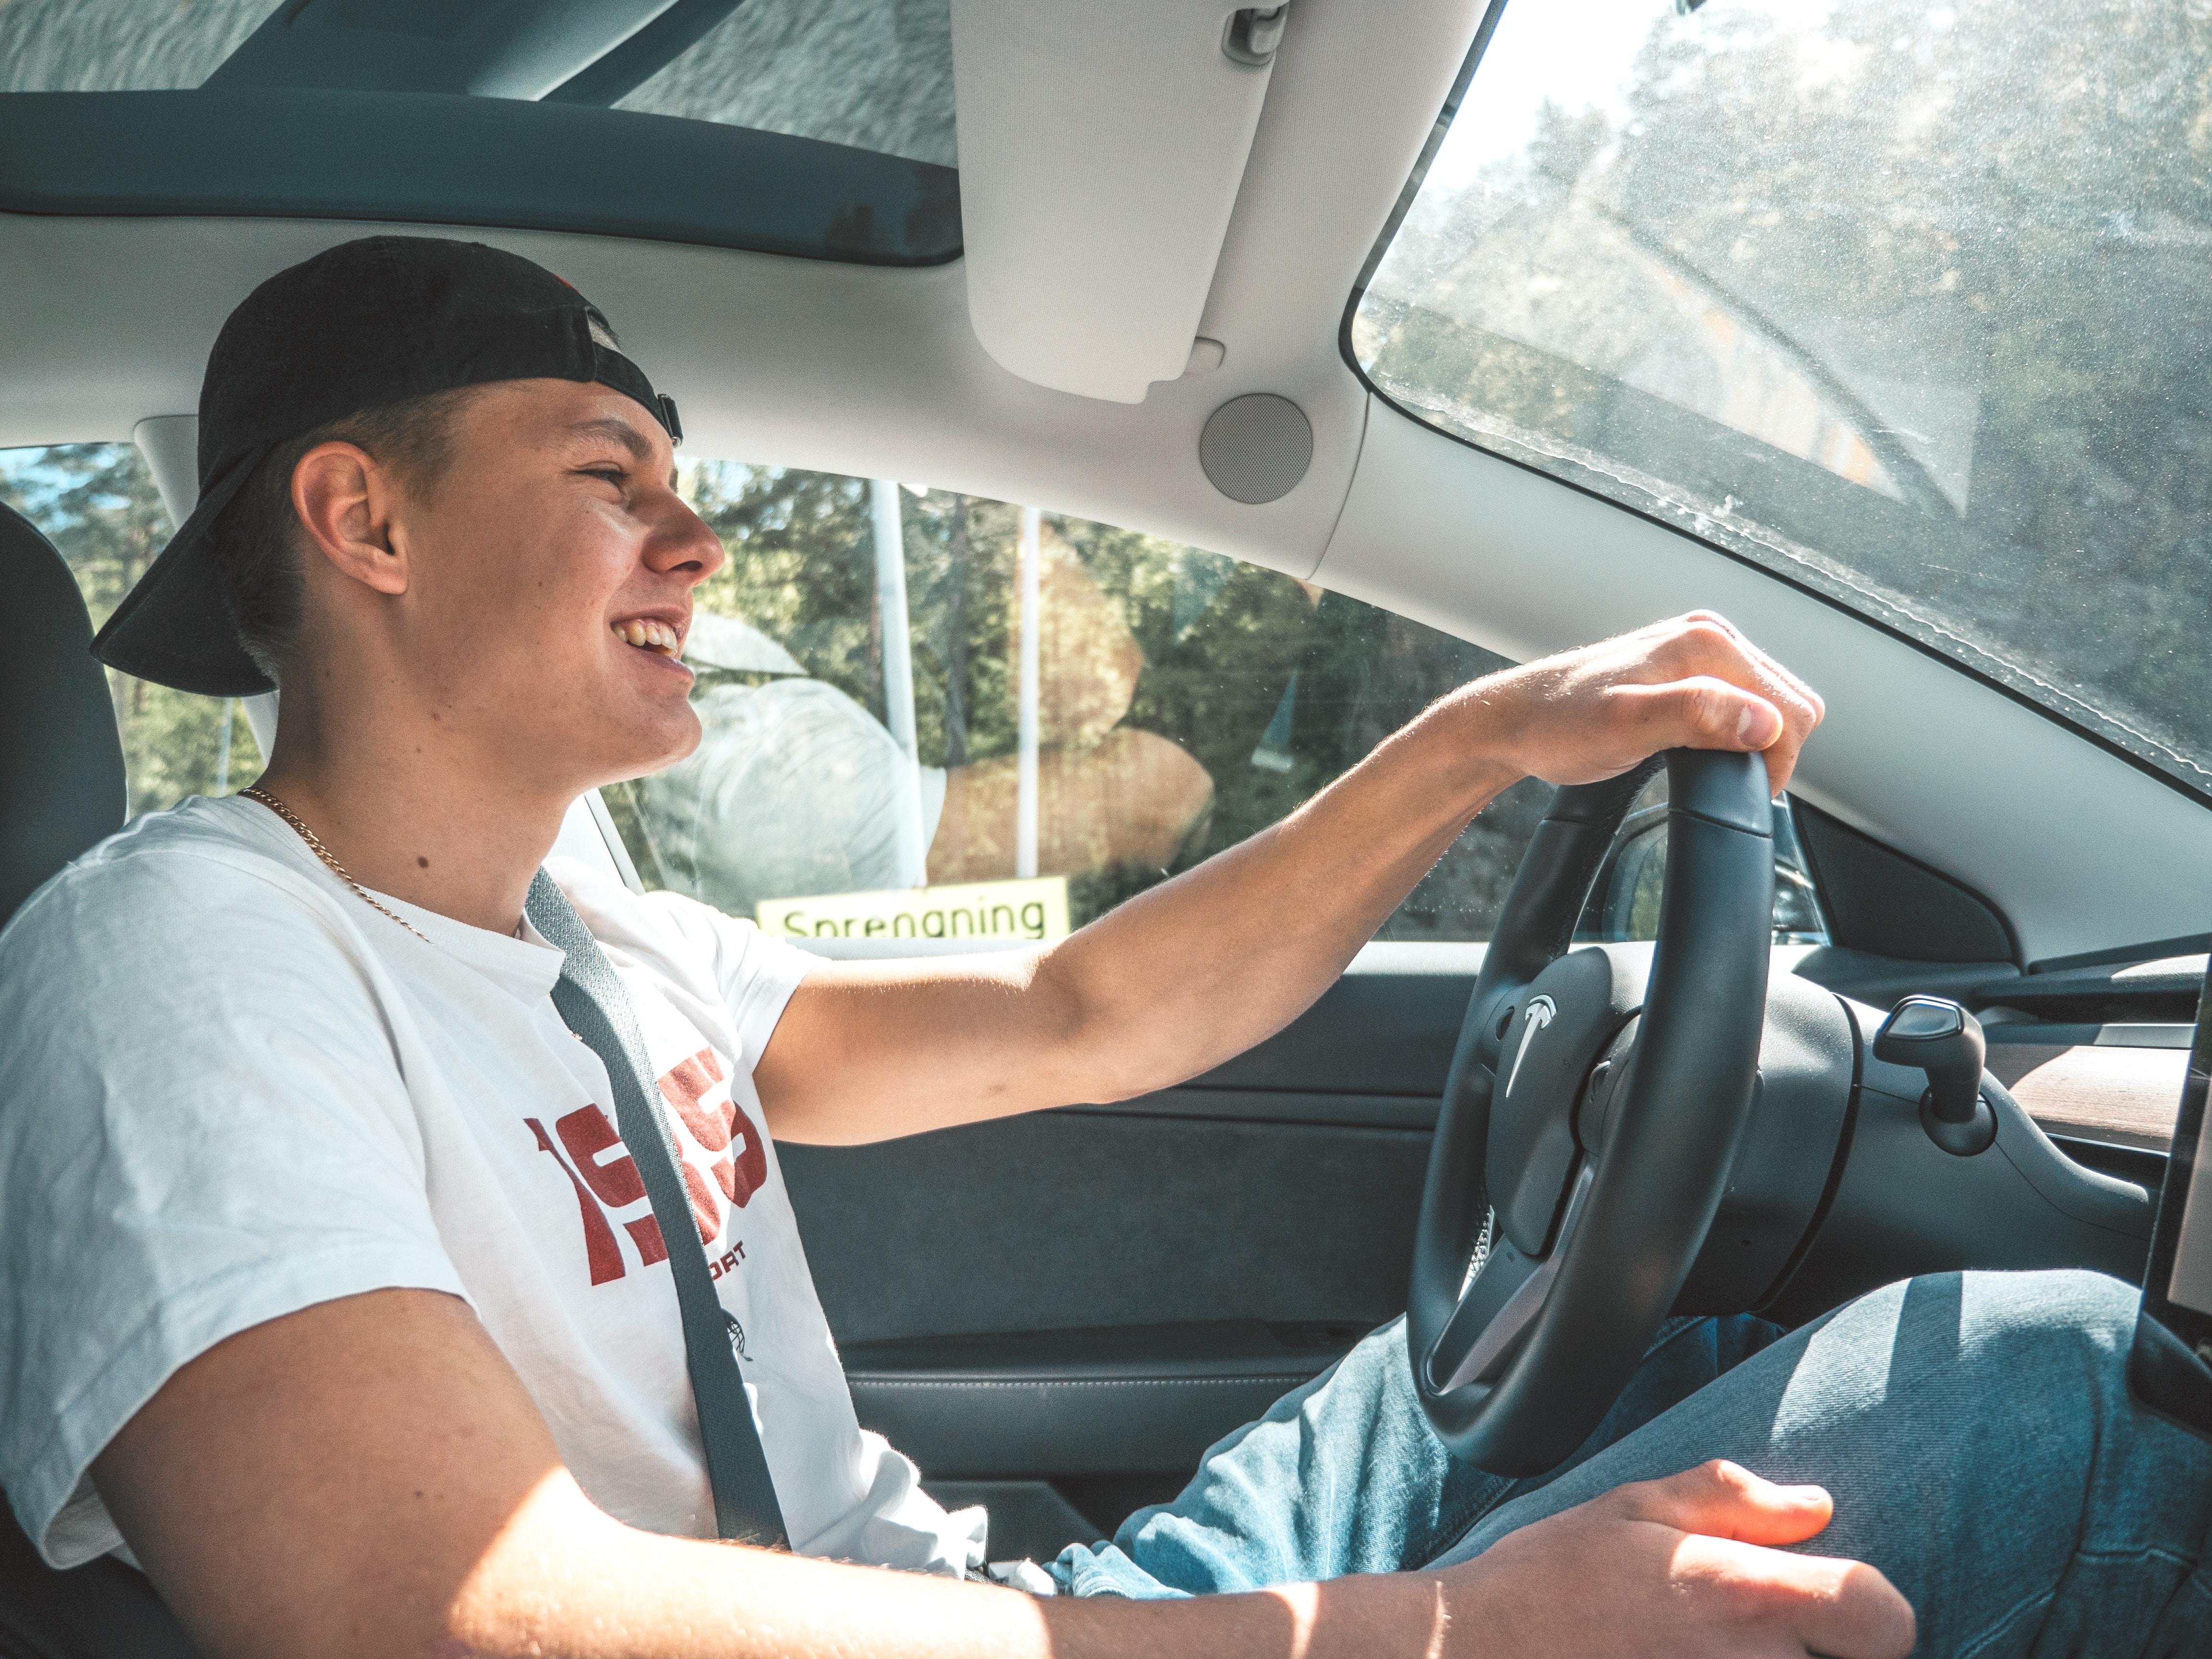 Permissive use refers to situations in which you allow someone else to operate your vehicle, even if they're not listed on your insurance policy. Most insurance policies extend coverage to drivers who have been granted permissive use, assuming they meet certain criteria.